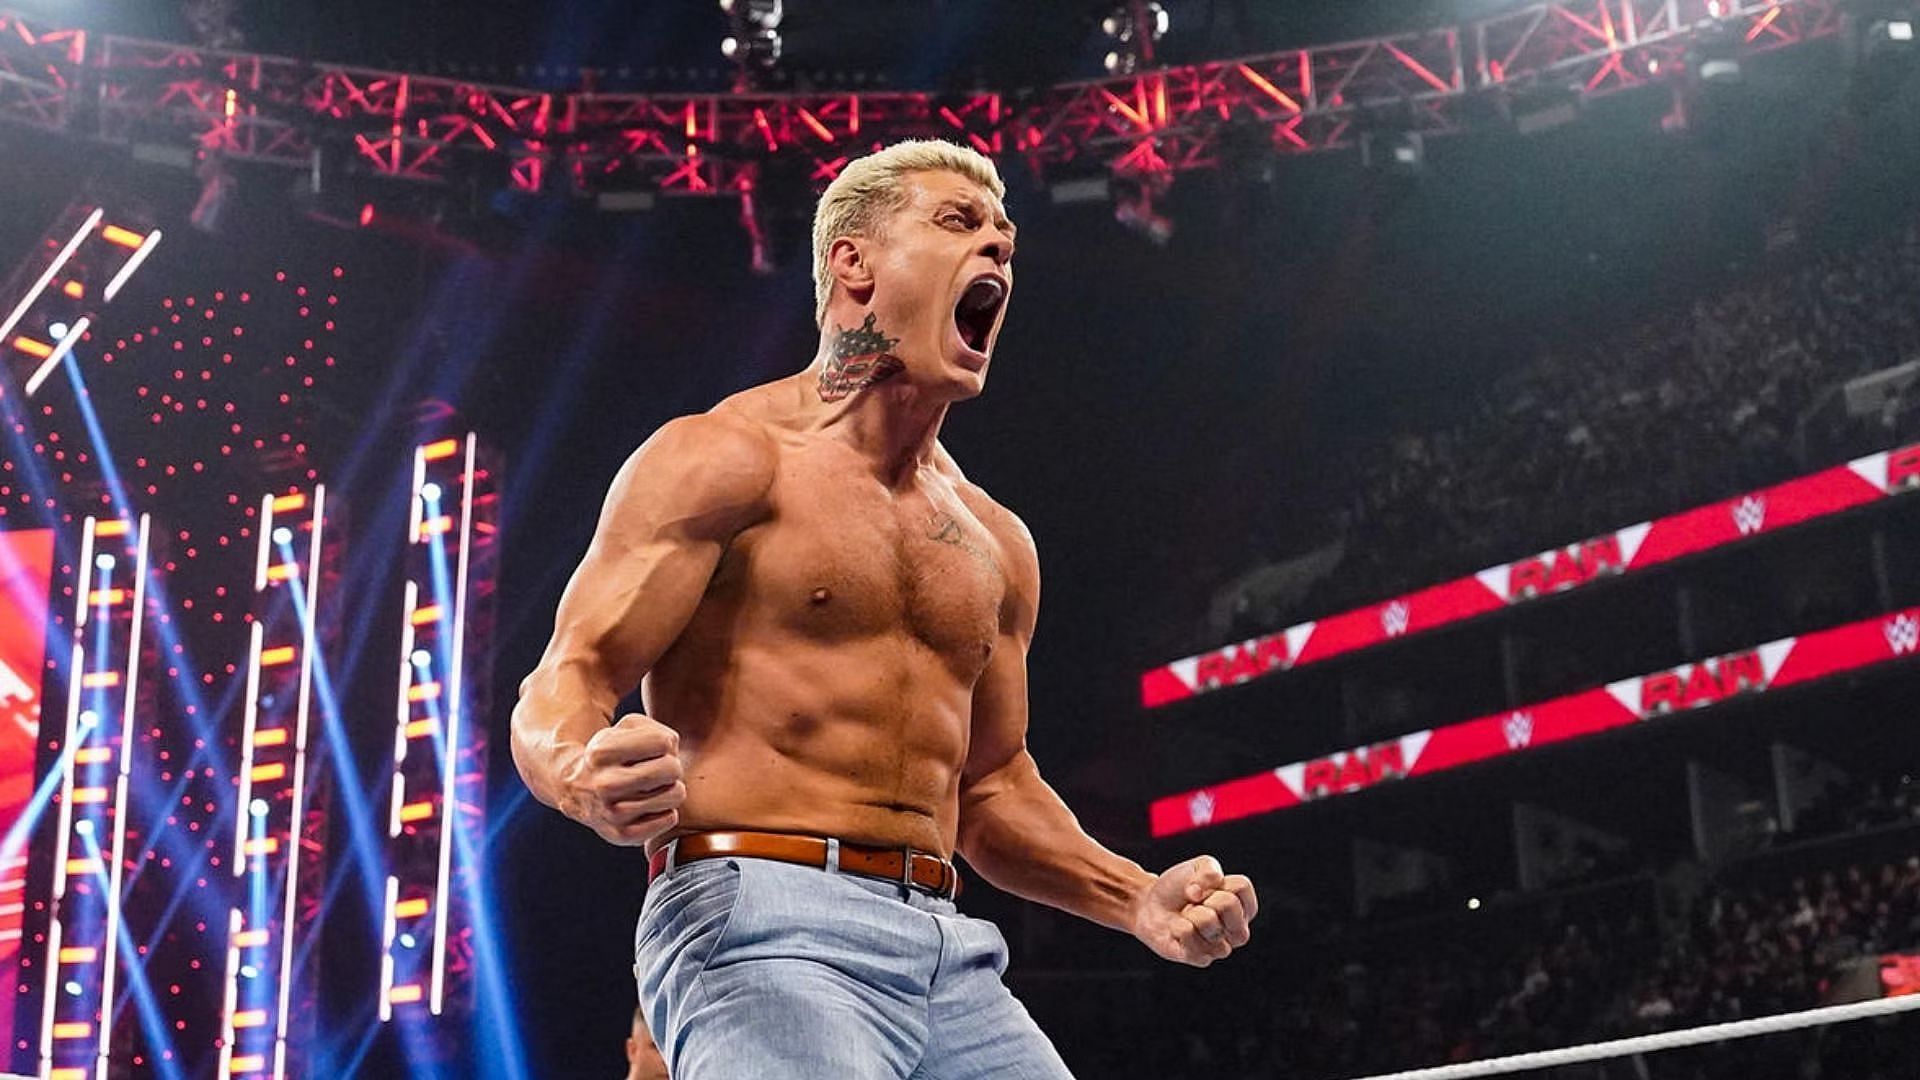 Cody Rhodes and John Cena could main event WrestleMania!